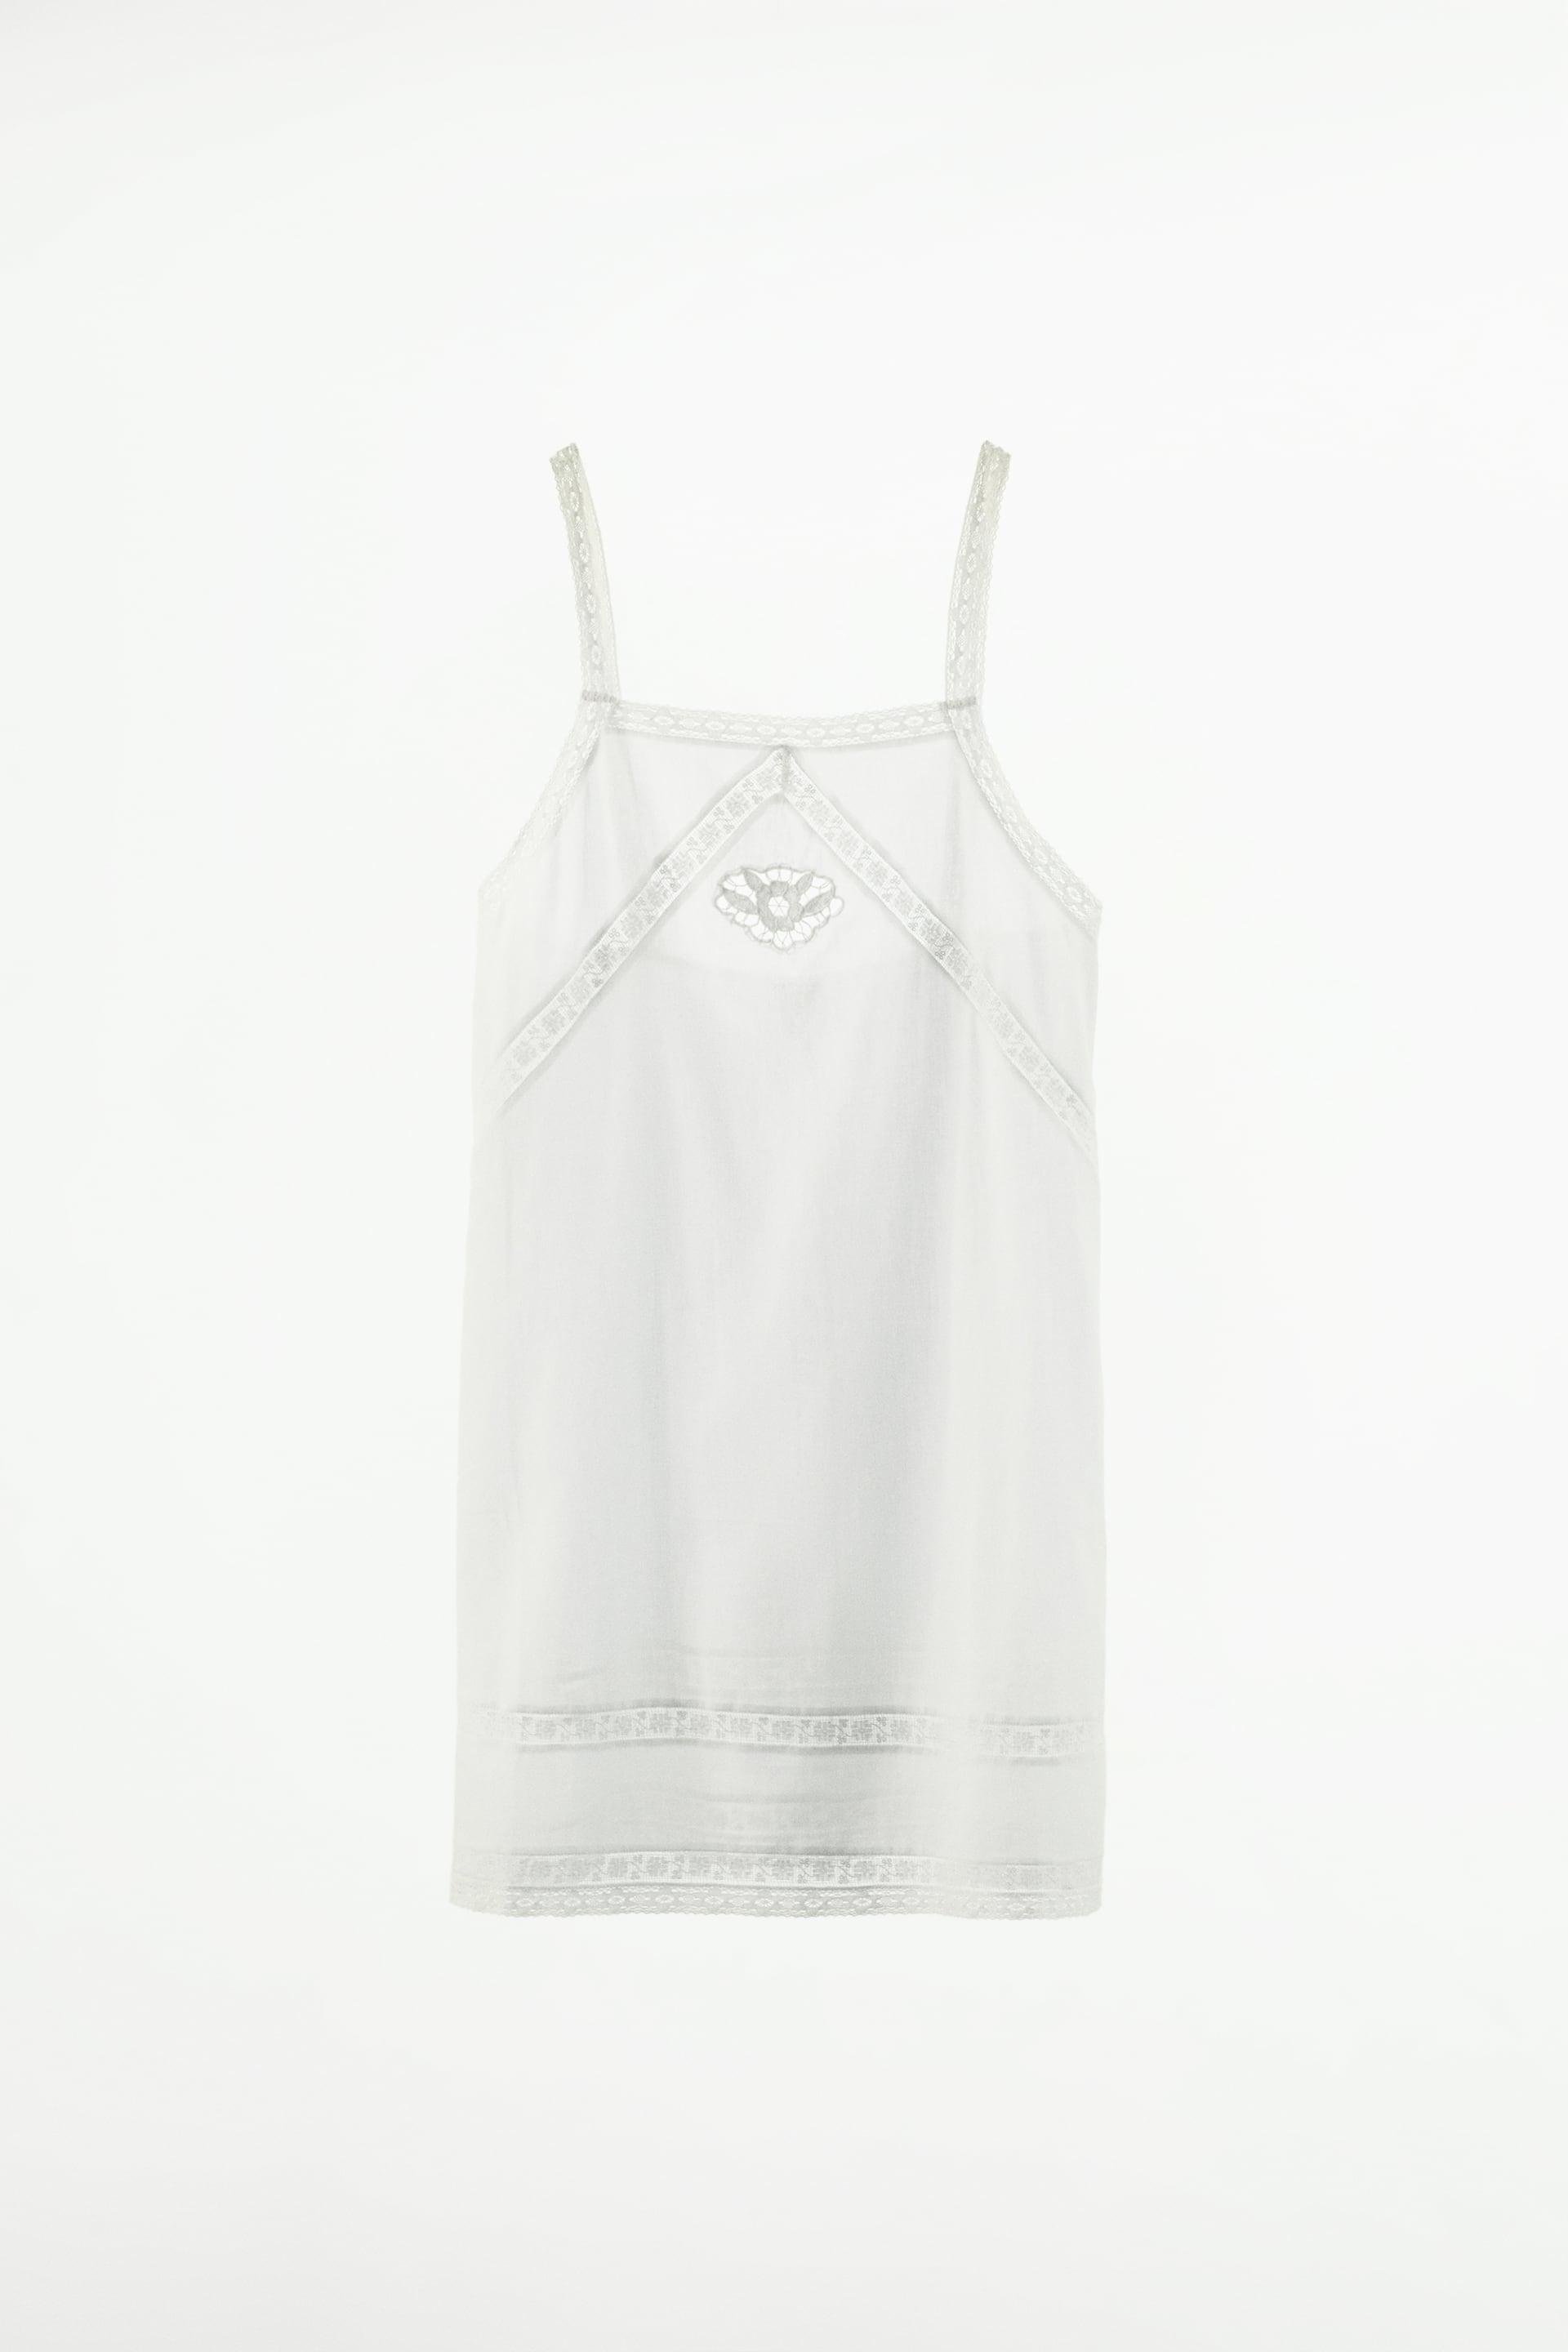 EMBROIDERED COTTON DRESS by ZARA